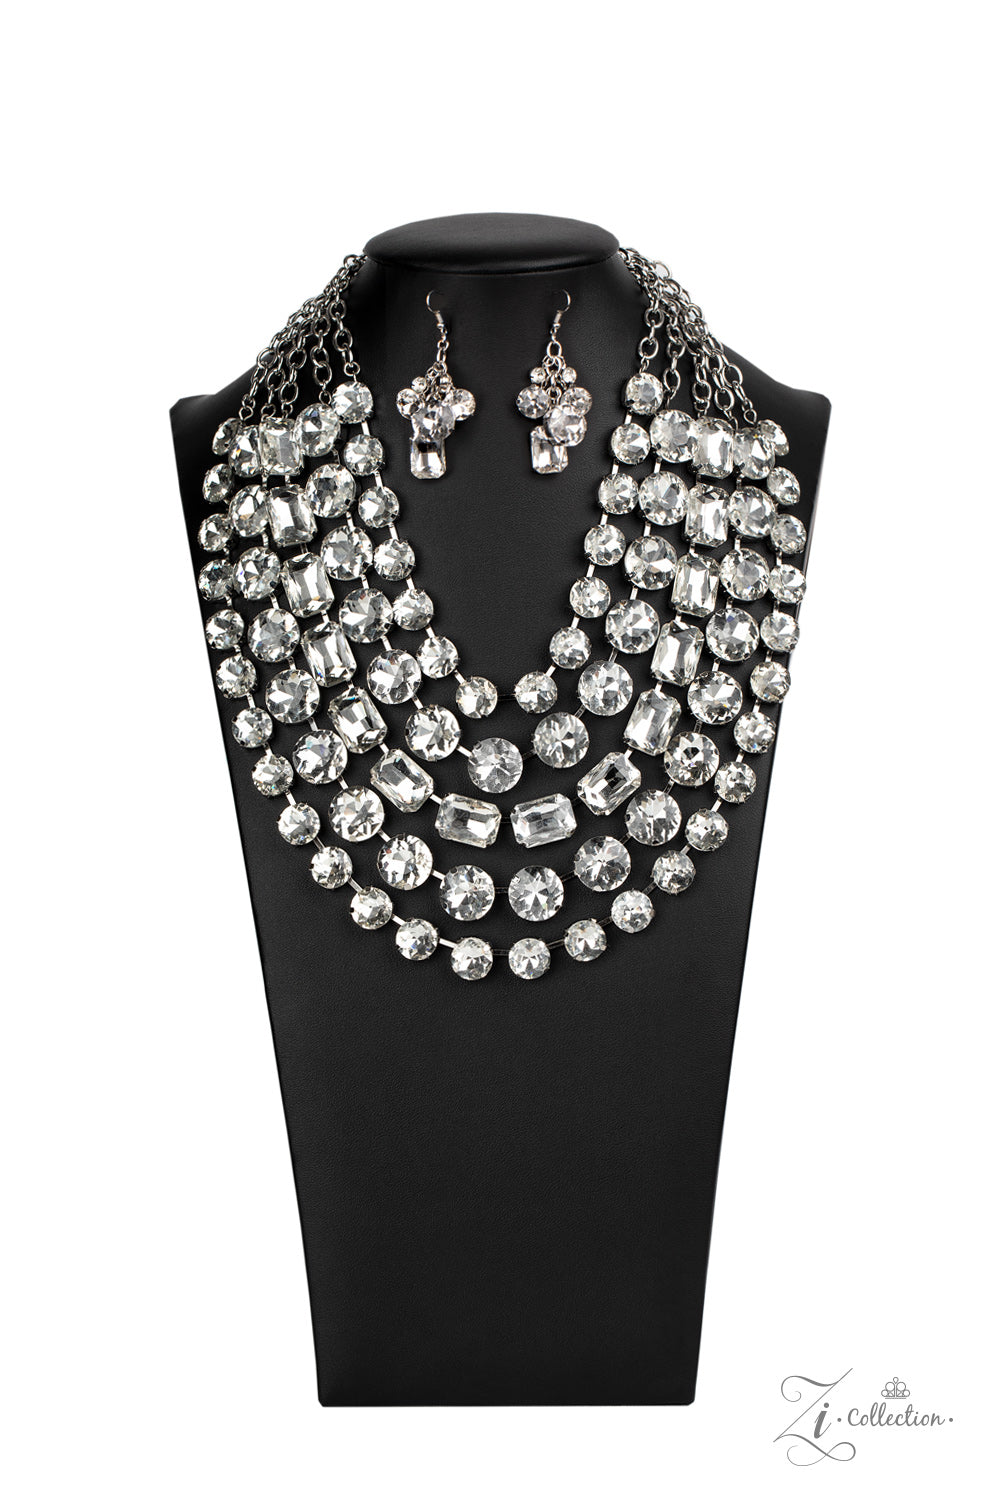 Irresistible - Zi Collection Necklace Diamond Layered 2020